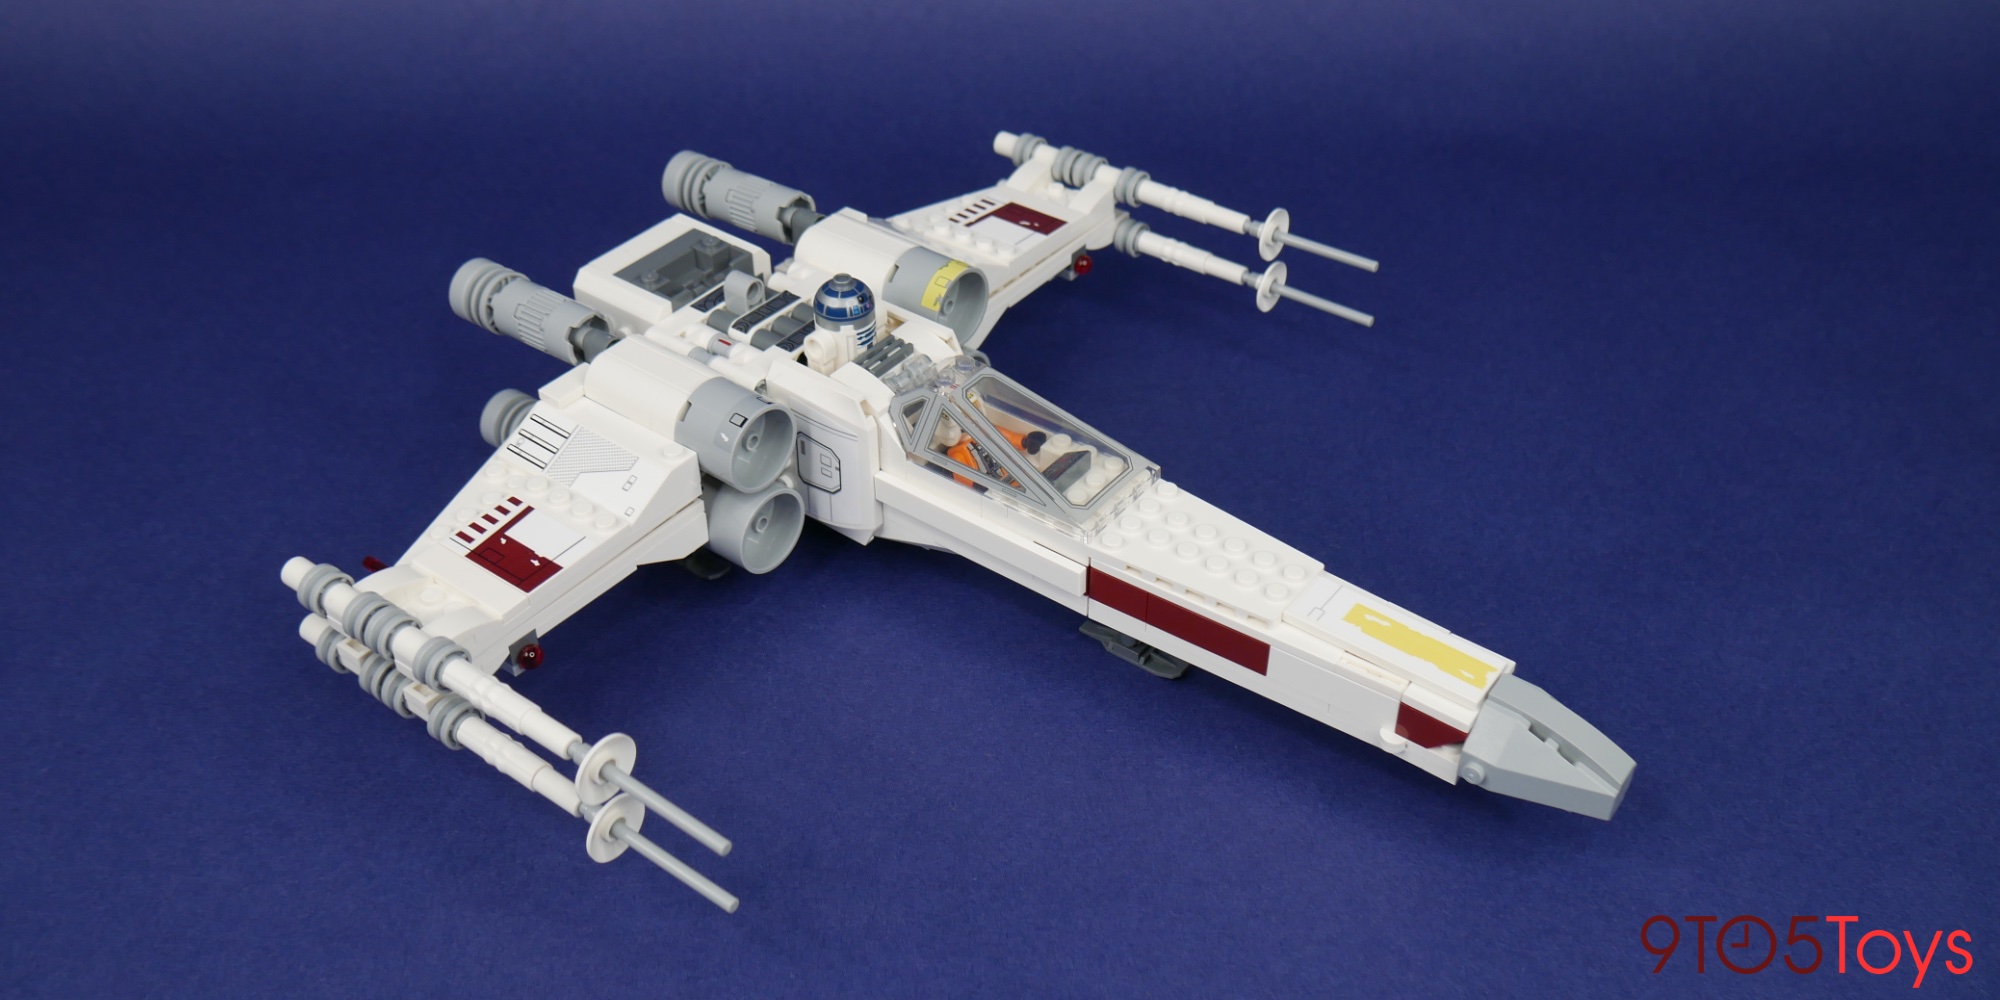 LEGO X-Wing 2021 review: A classic starfighter reborn - 9to5Toys